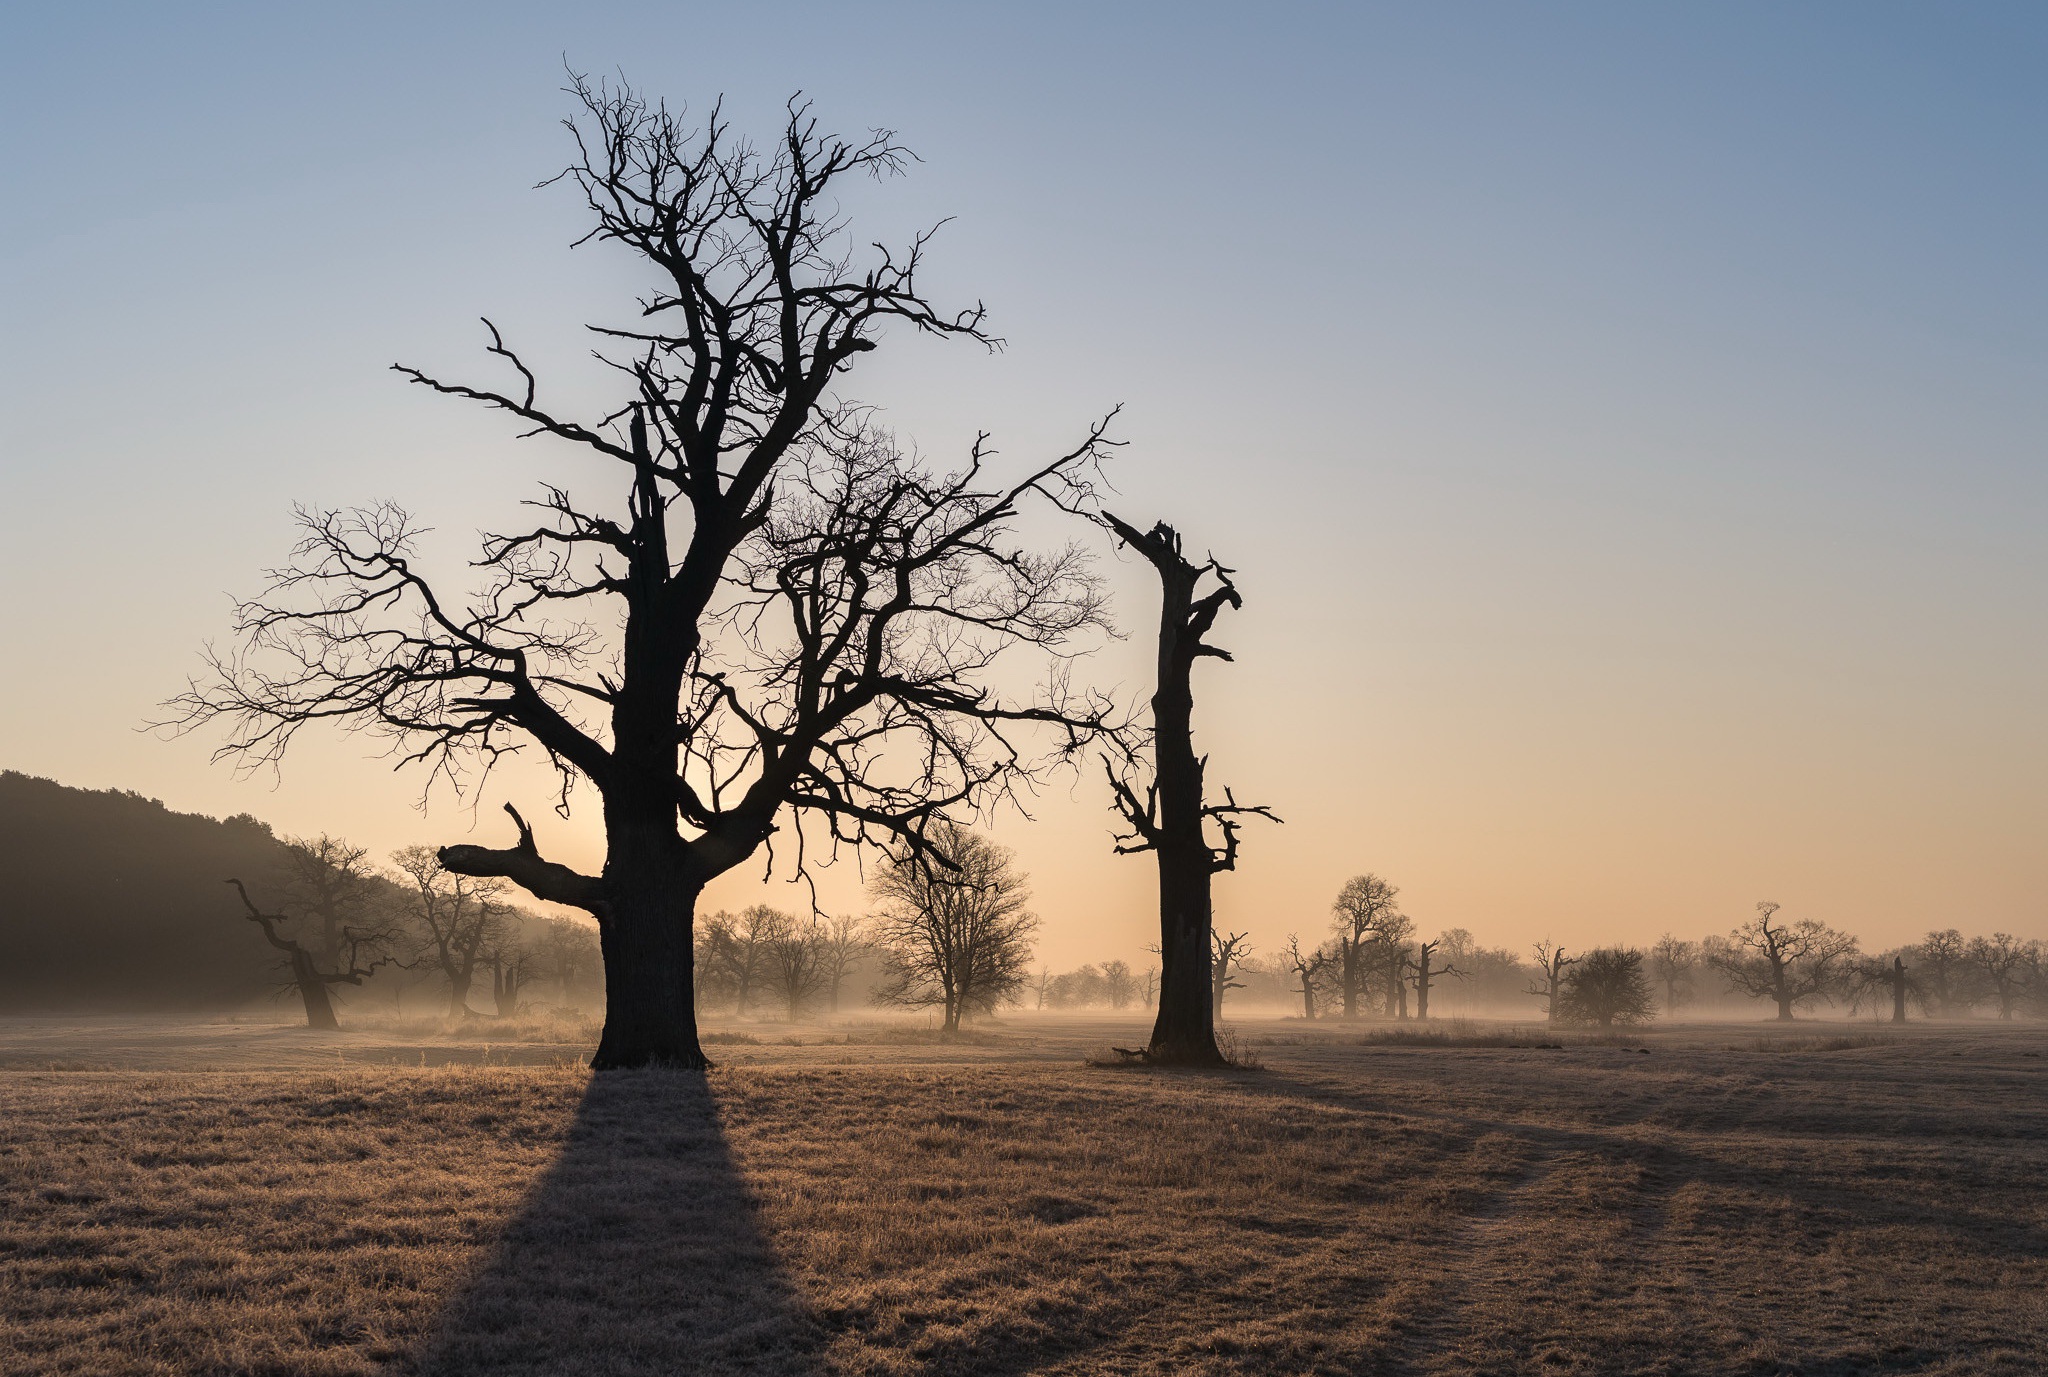 General 2048x1377 nature trees landscape dead trees morning mist clear sky